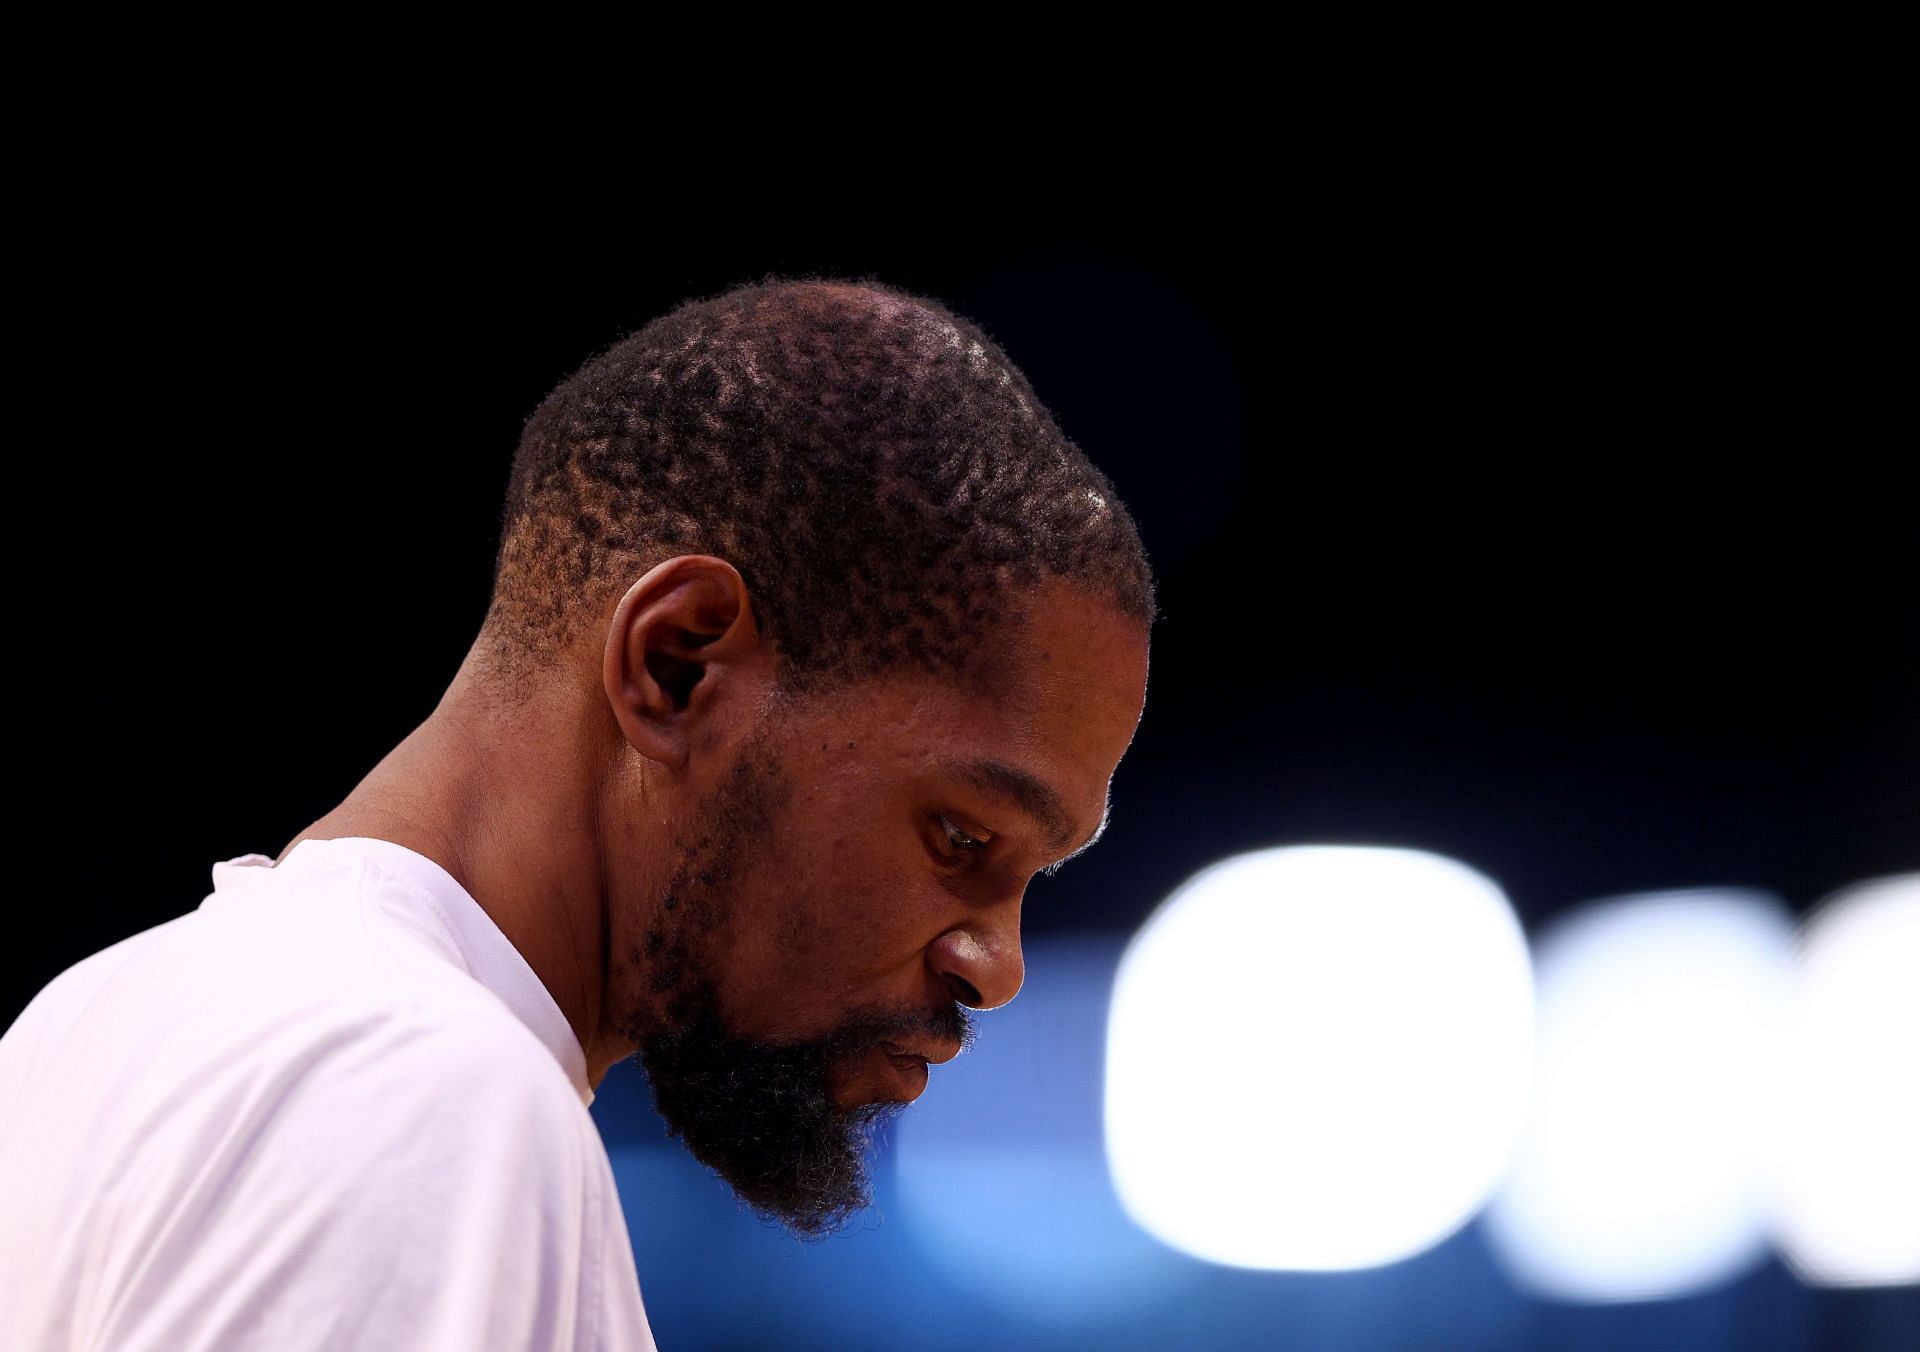 Brooklyn Nets superstar Kevin Durant has requested a trade